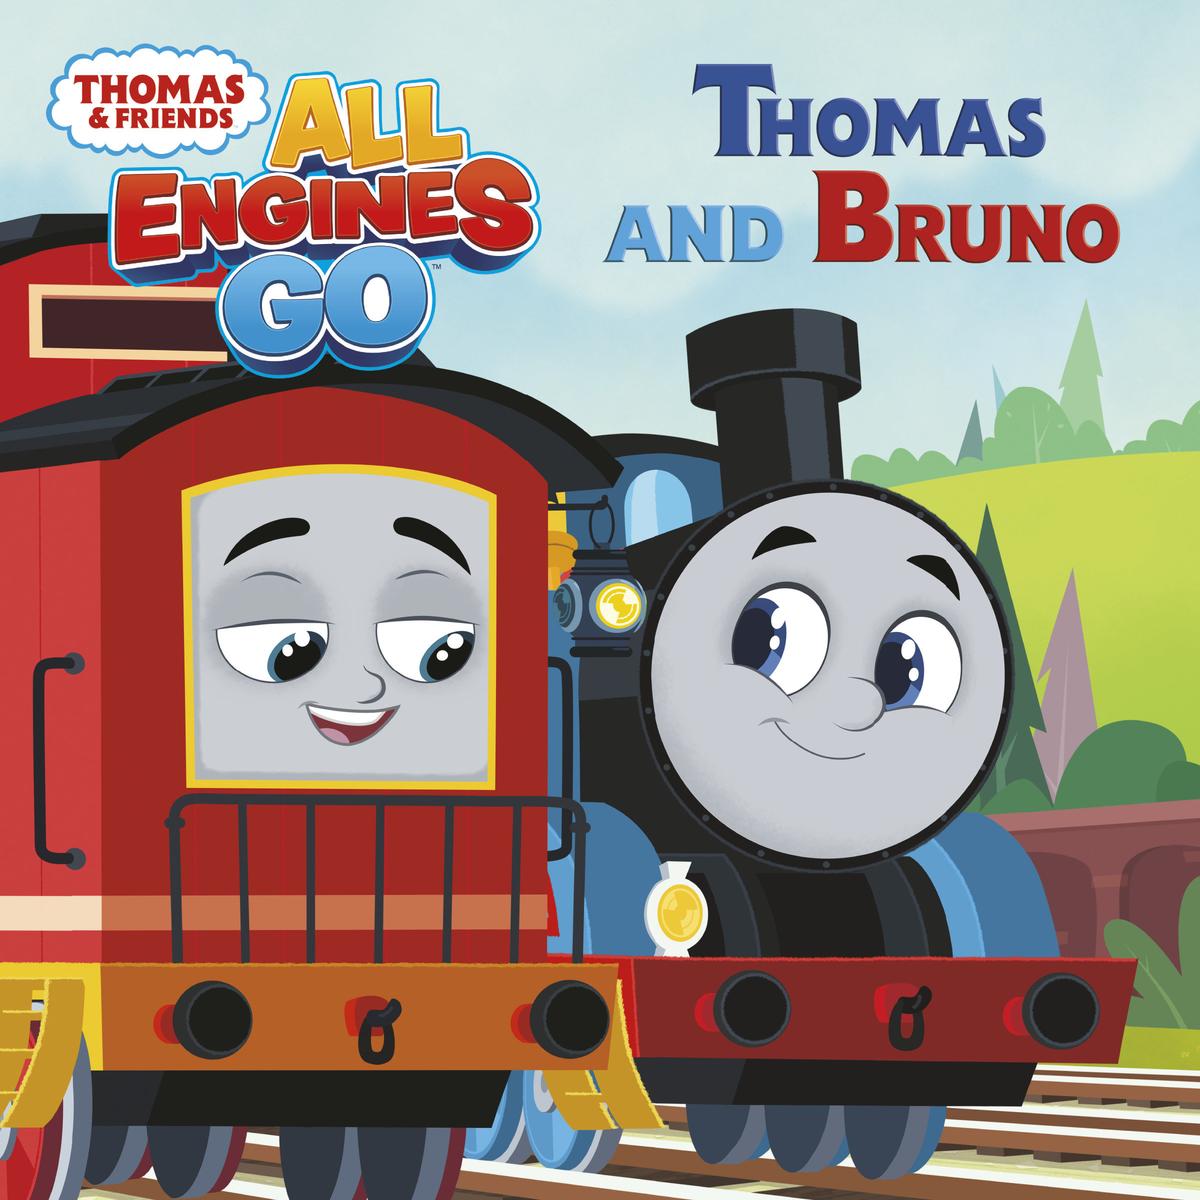 Thomas and Bruno (Thomas & Friends - All Engines Go)